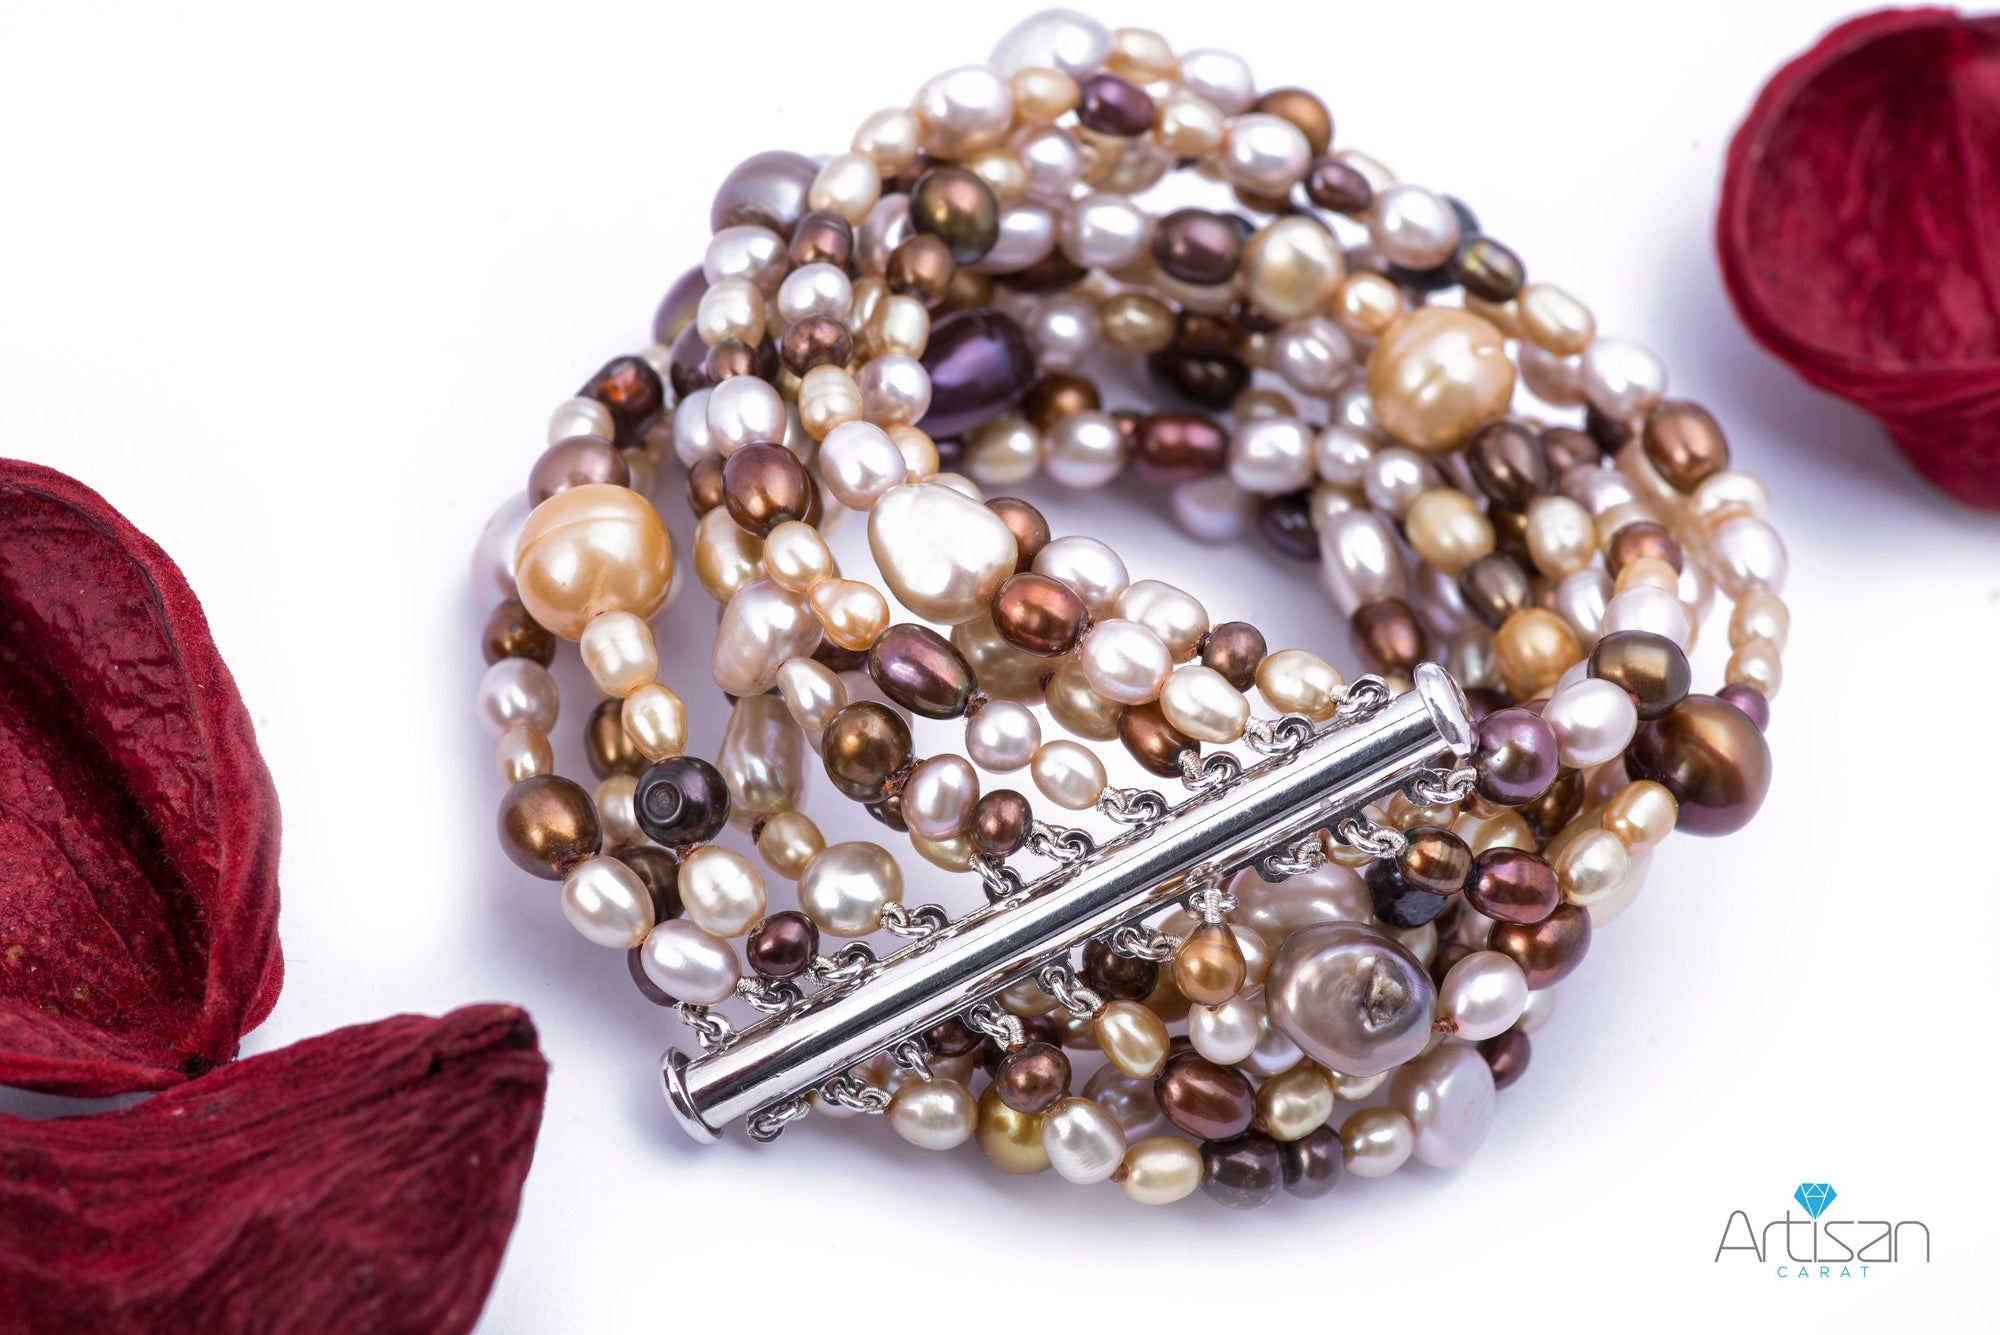 Details more than 258 colored pearl bracelets